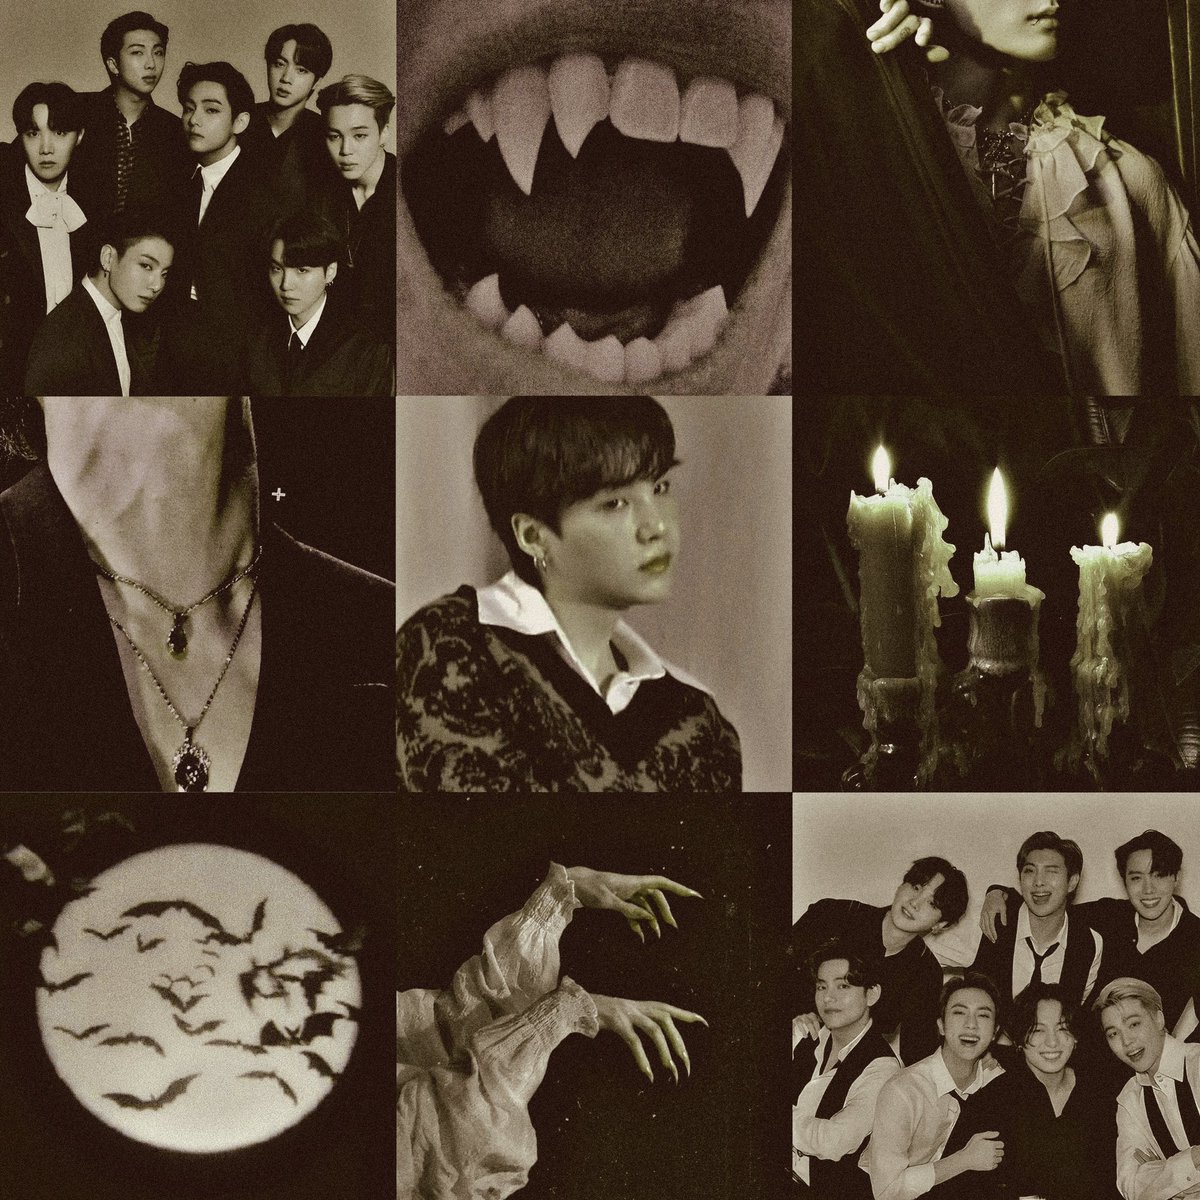 ot7 #btsau where the bangtan coven has been around for centuries, solidified as 6 members for almost all of that time, until they start to gain sudden interest in human yg— before the coven can make a move, yg mysteriously disappears, only to return years later as a fledgling